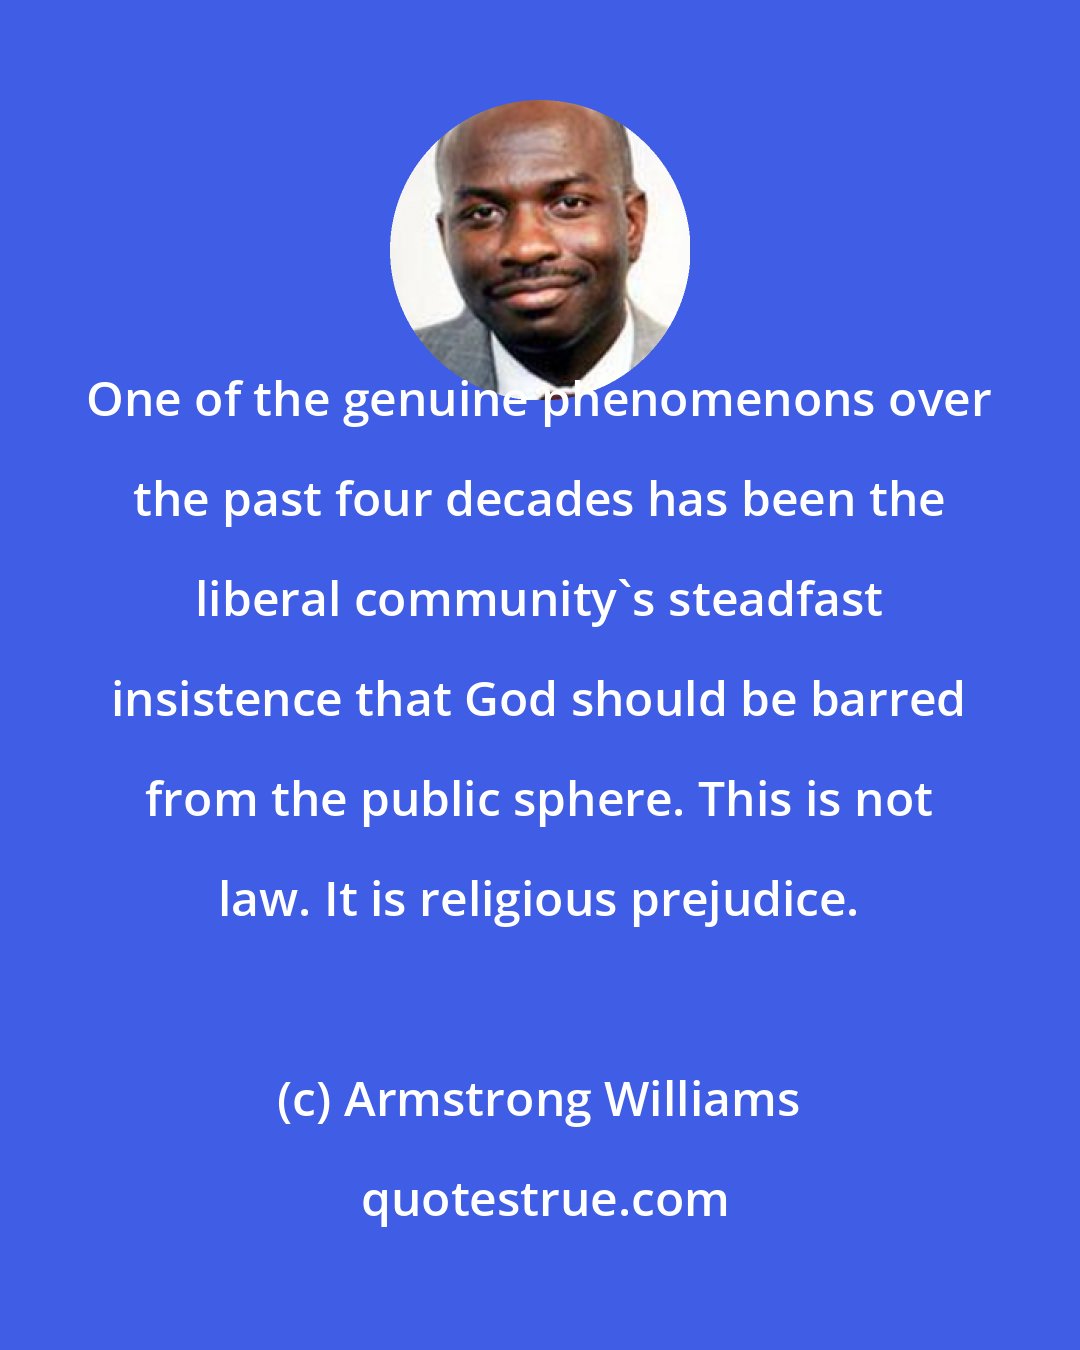 Armstrong Williams: One of the genuine phenomenons over the past four decades has been the liberal community's steadfast insistence that God should be barred from the public sphere. This is not law. It is religious prejudice.